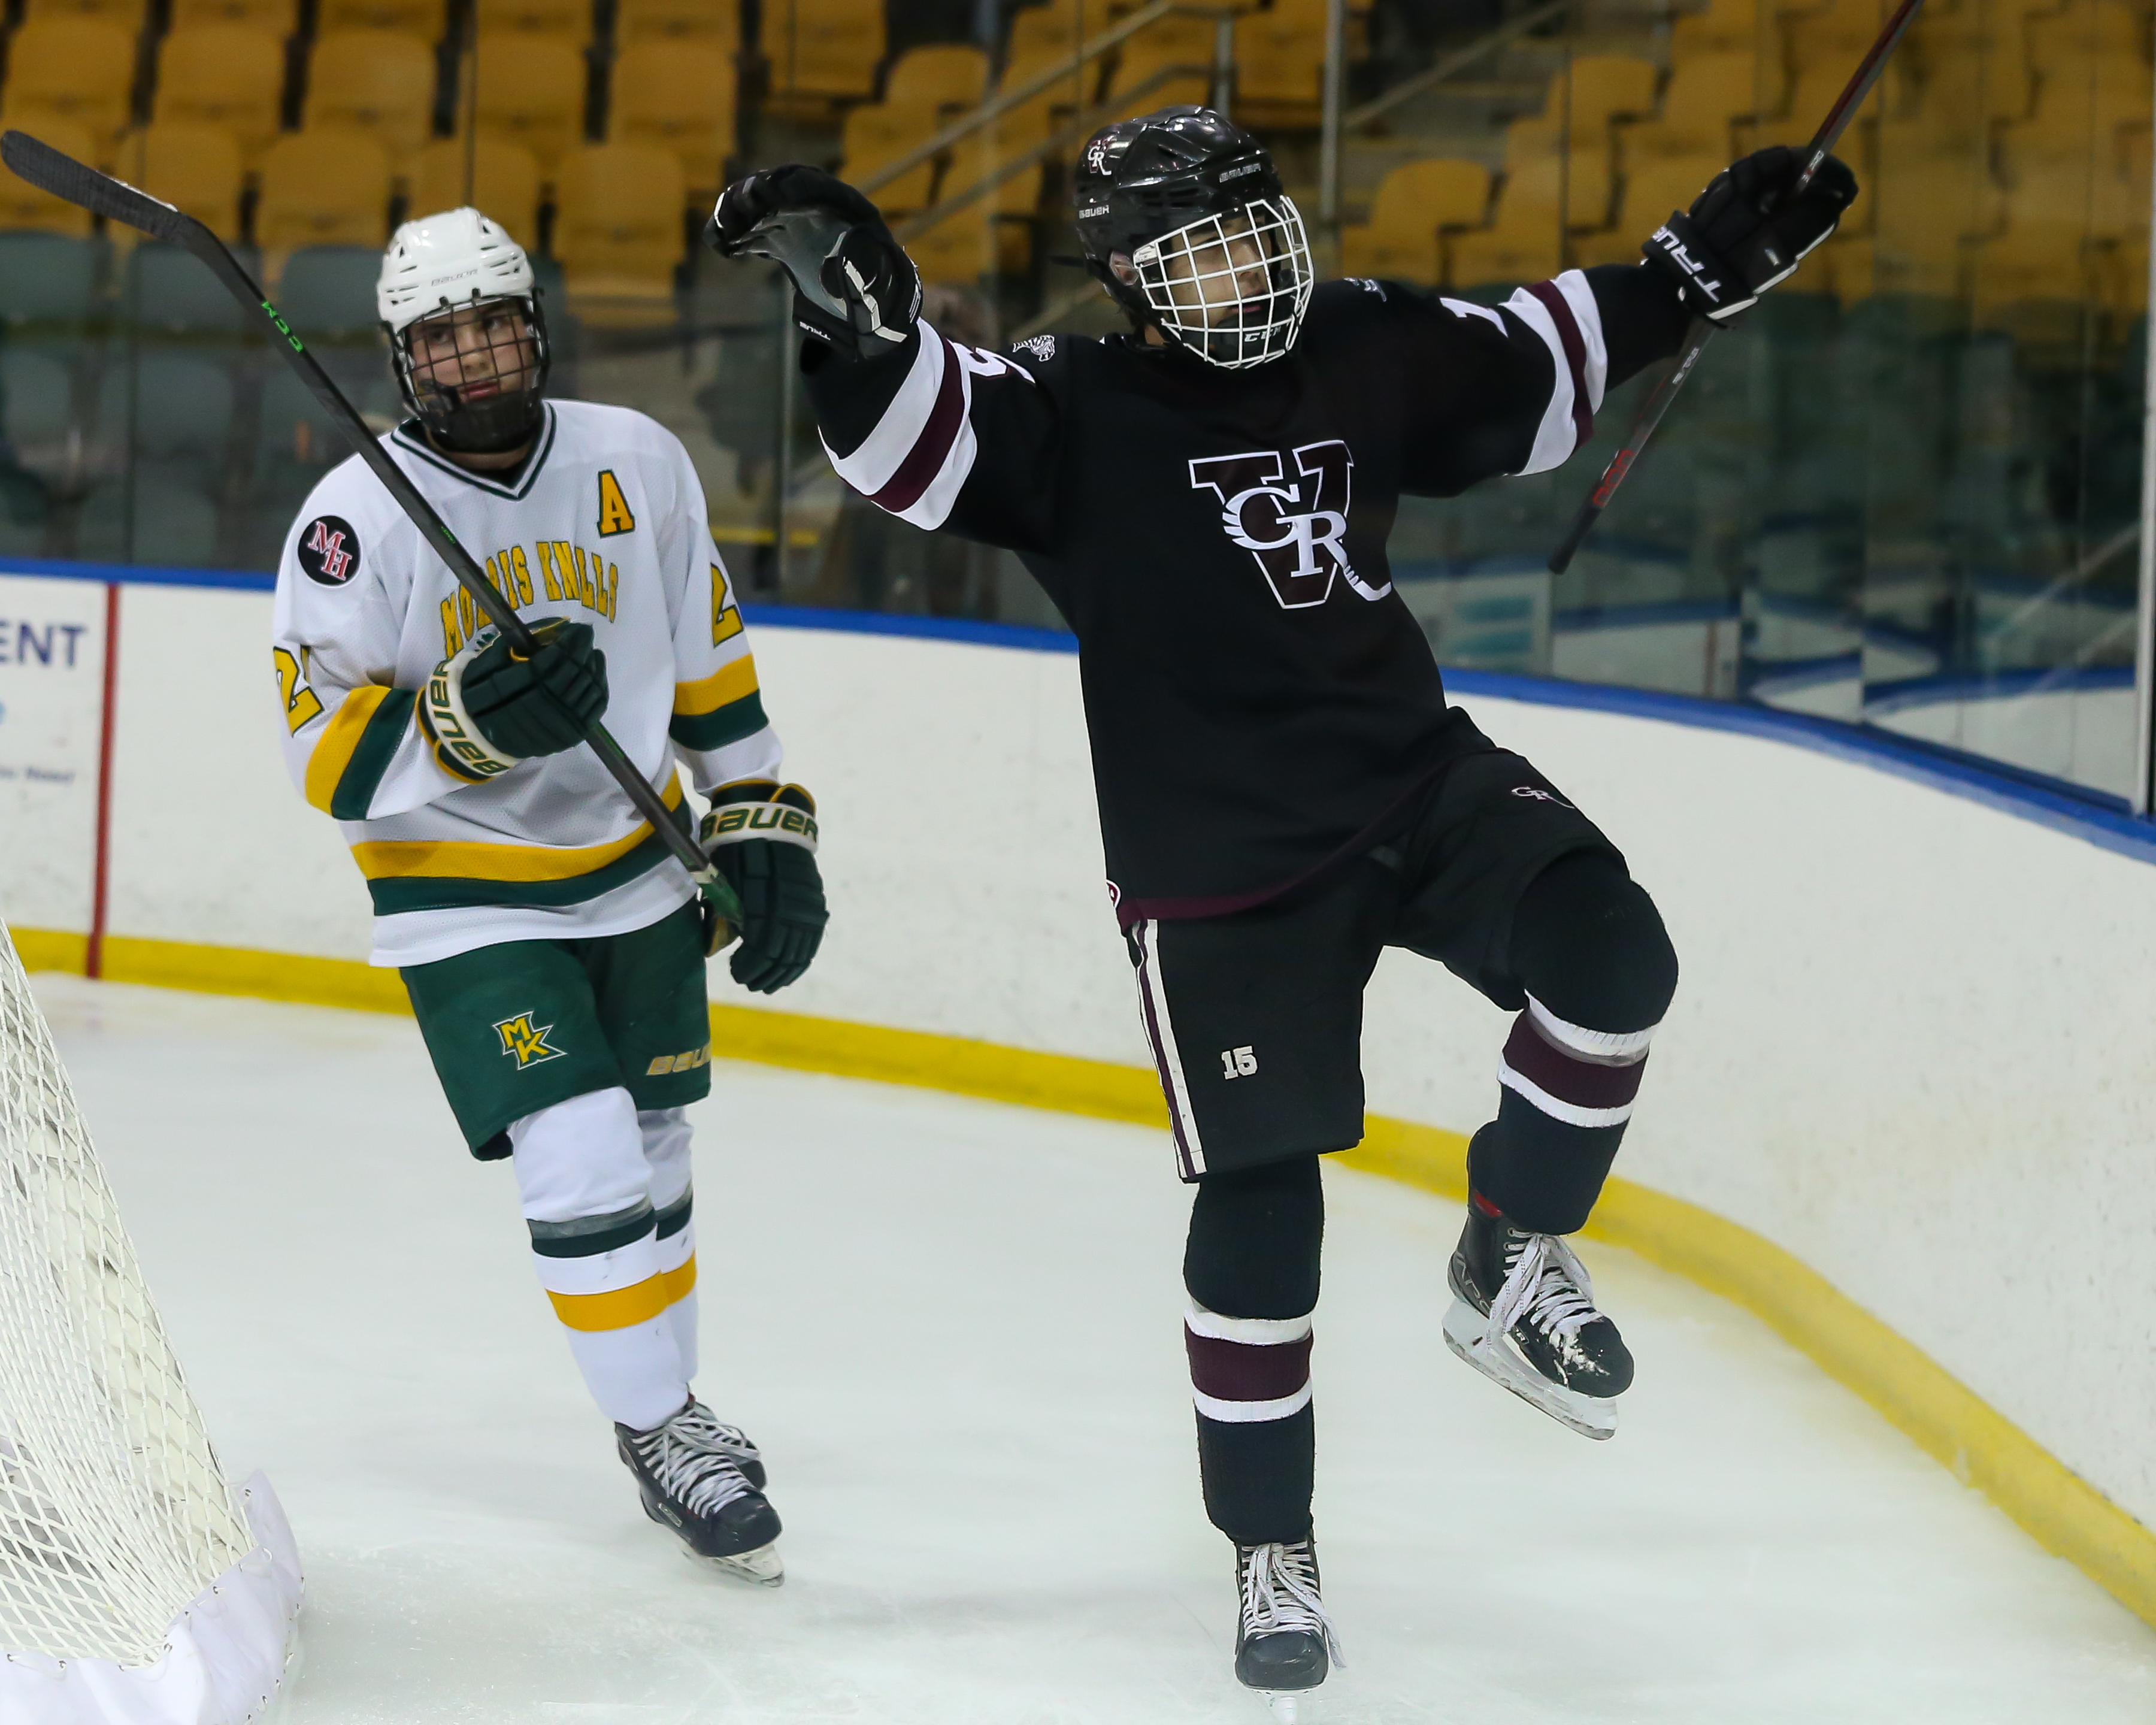 SEAST Hockey Joins Central Regional to Face Brick Stars at Prudential Center